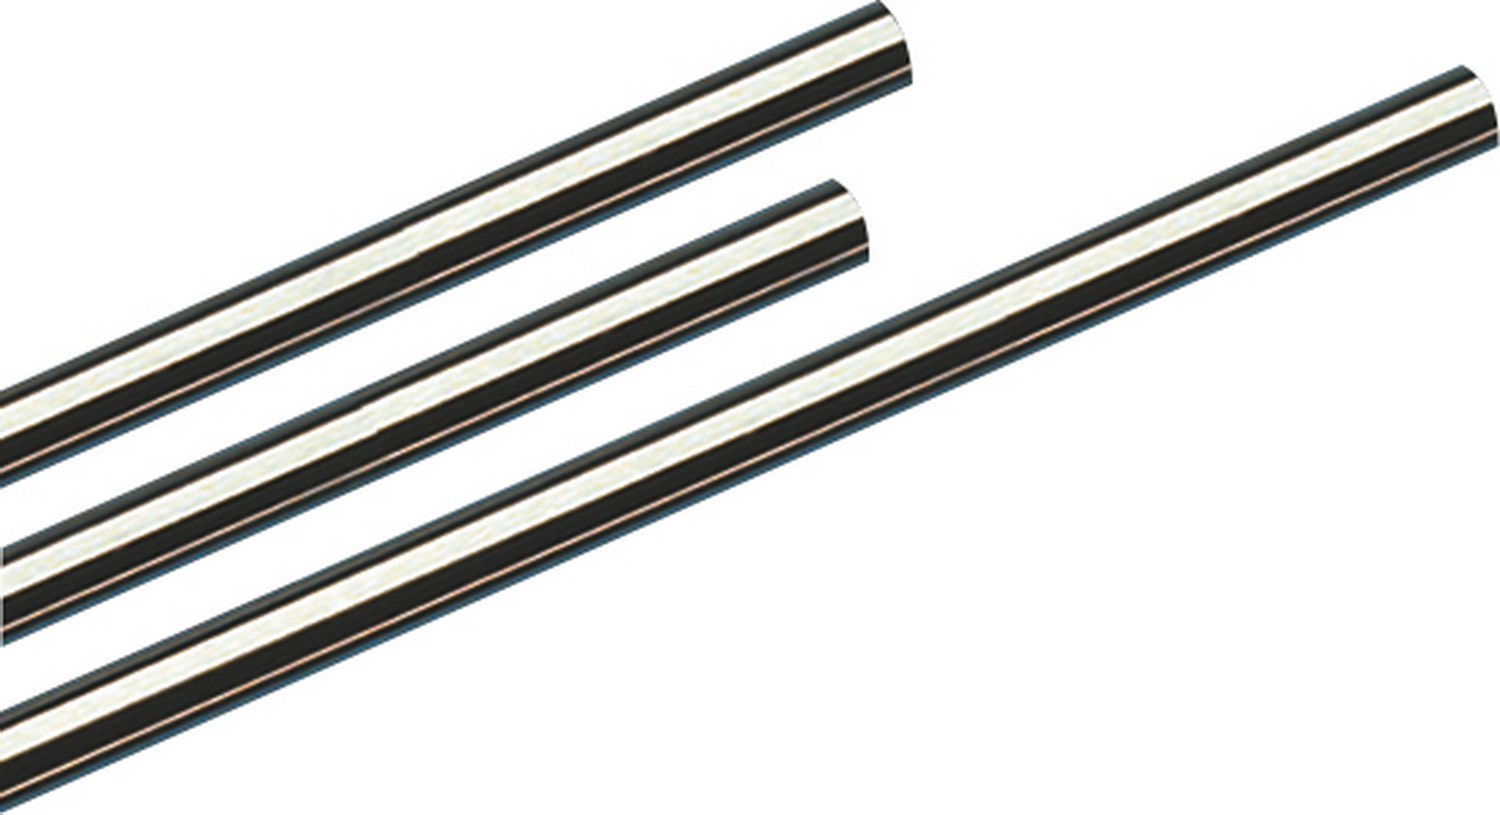 3" T-304 Stainless Steel Straight Tubing. 30330